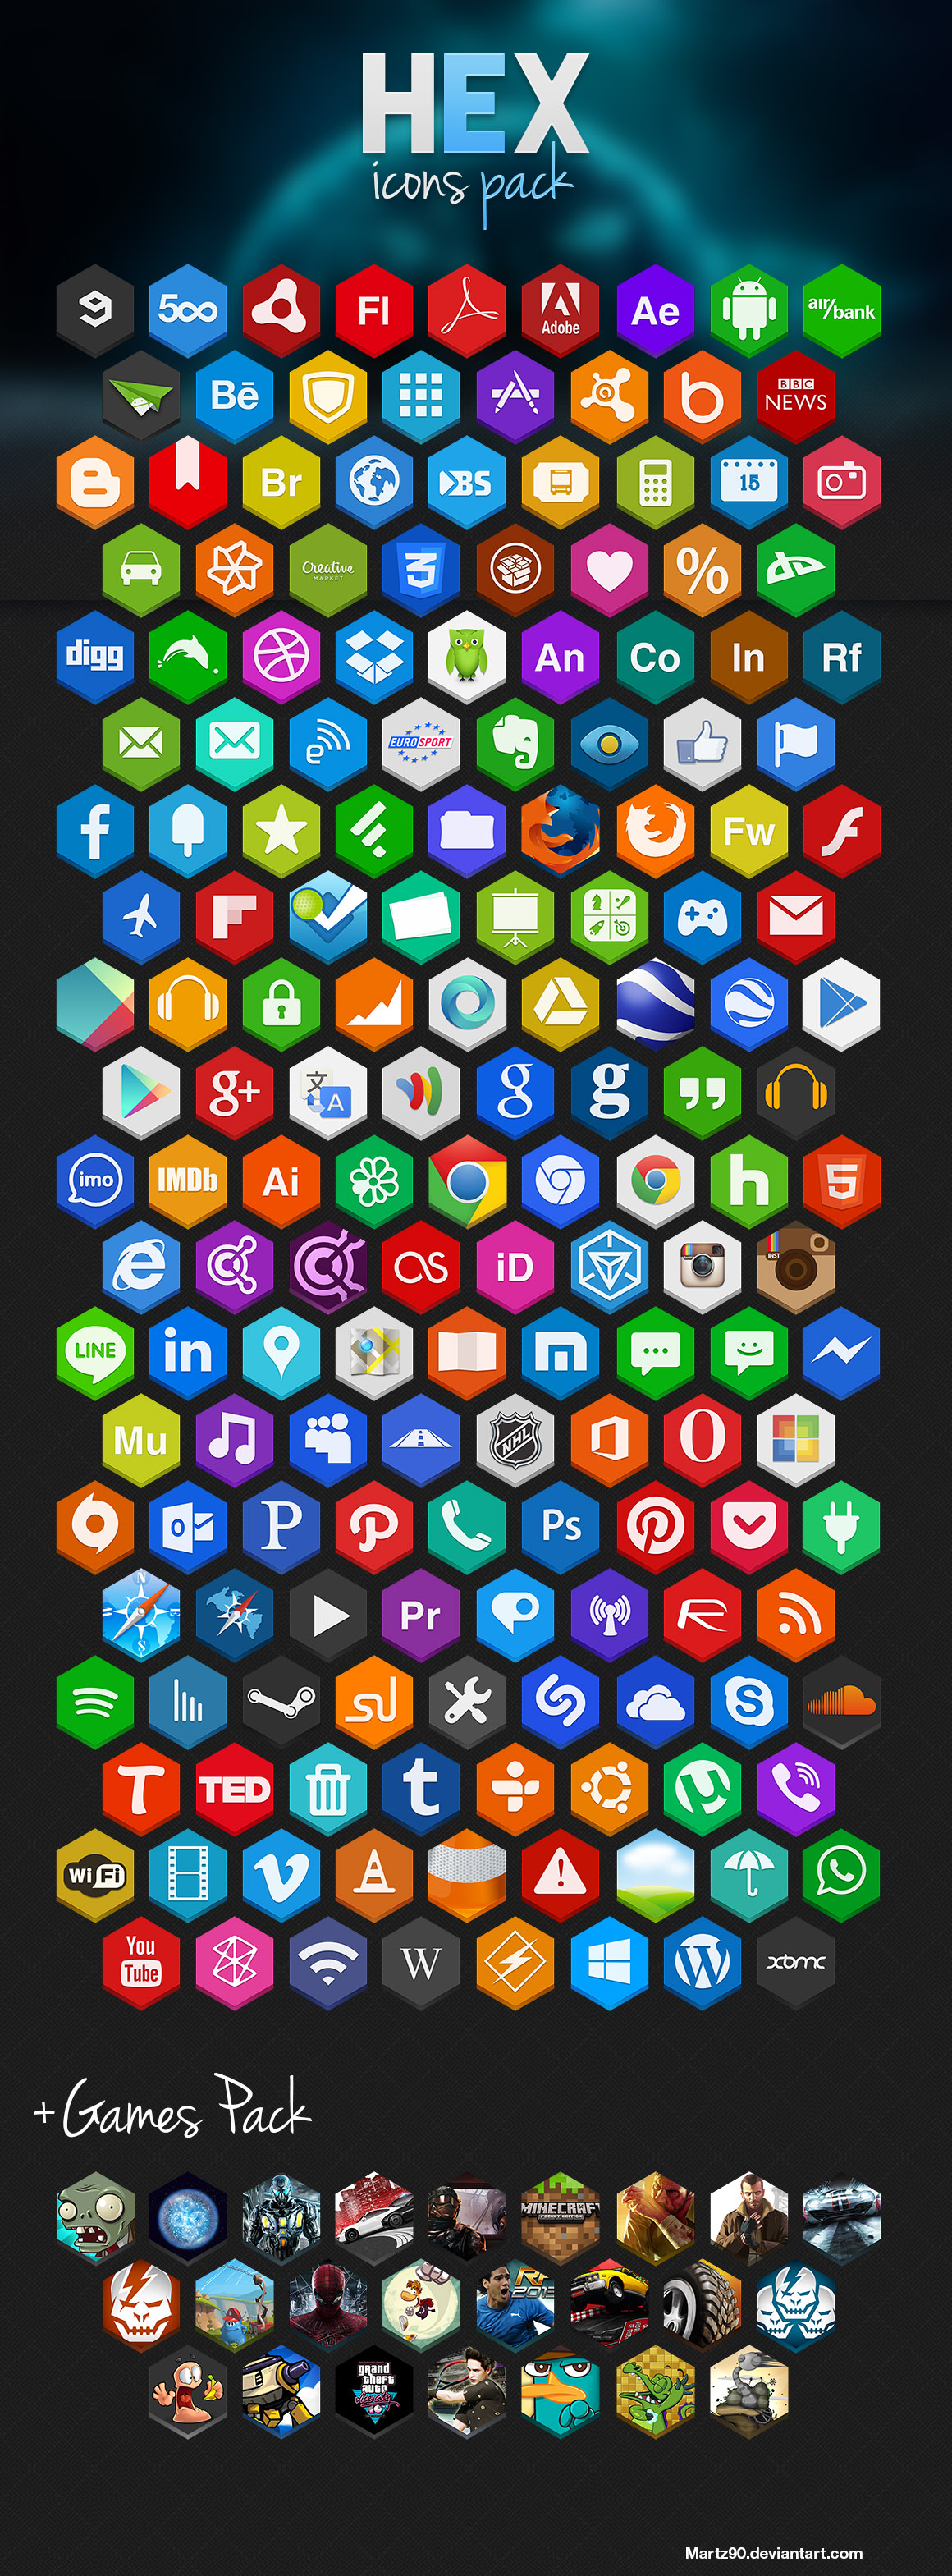 hex_icons_pack_by_martz90-d6g0rtx.jpg